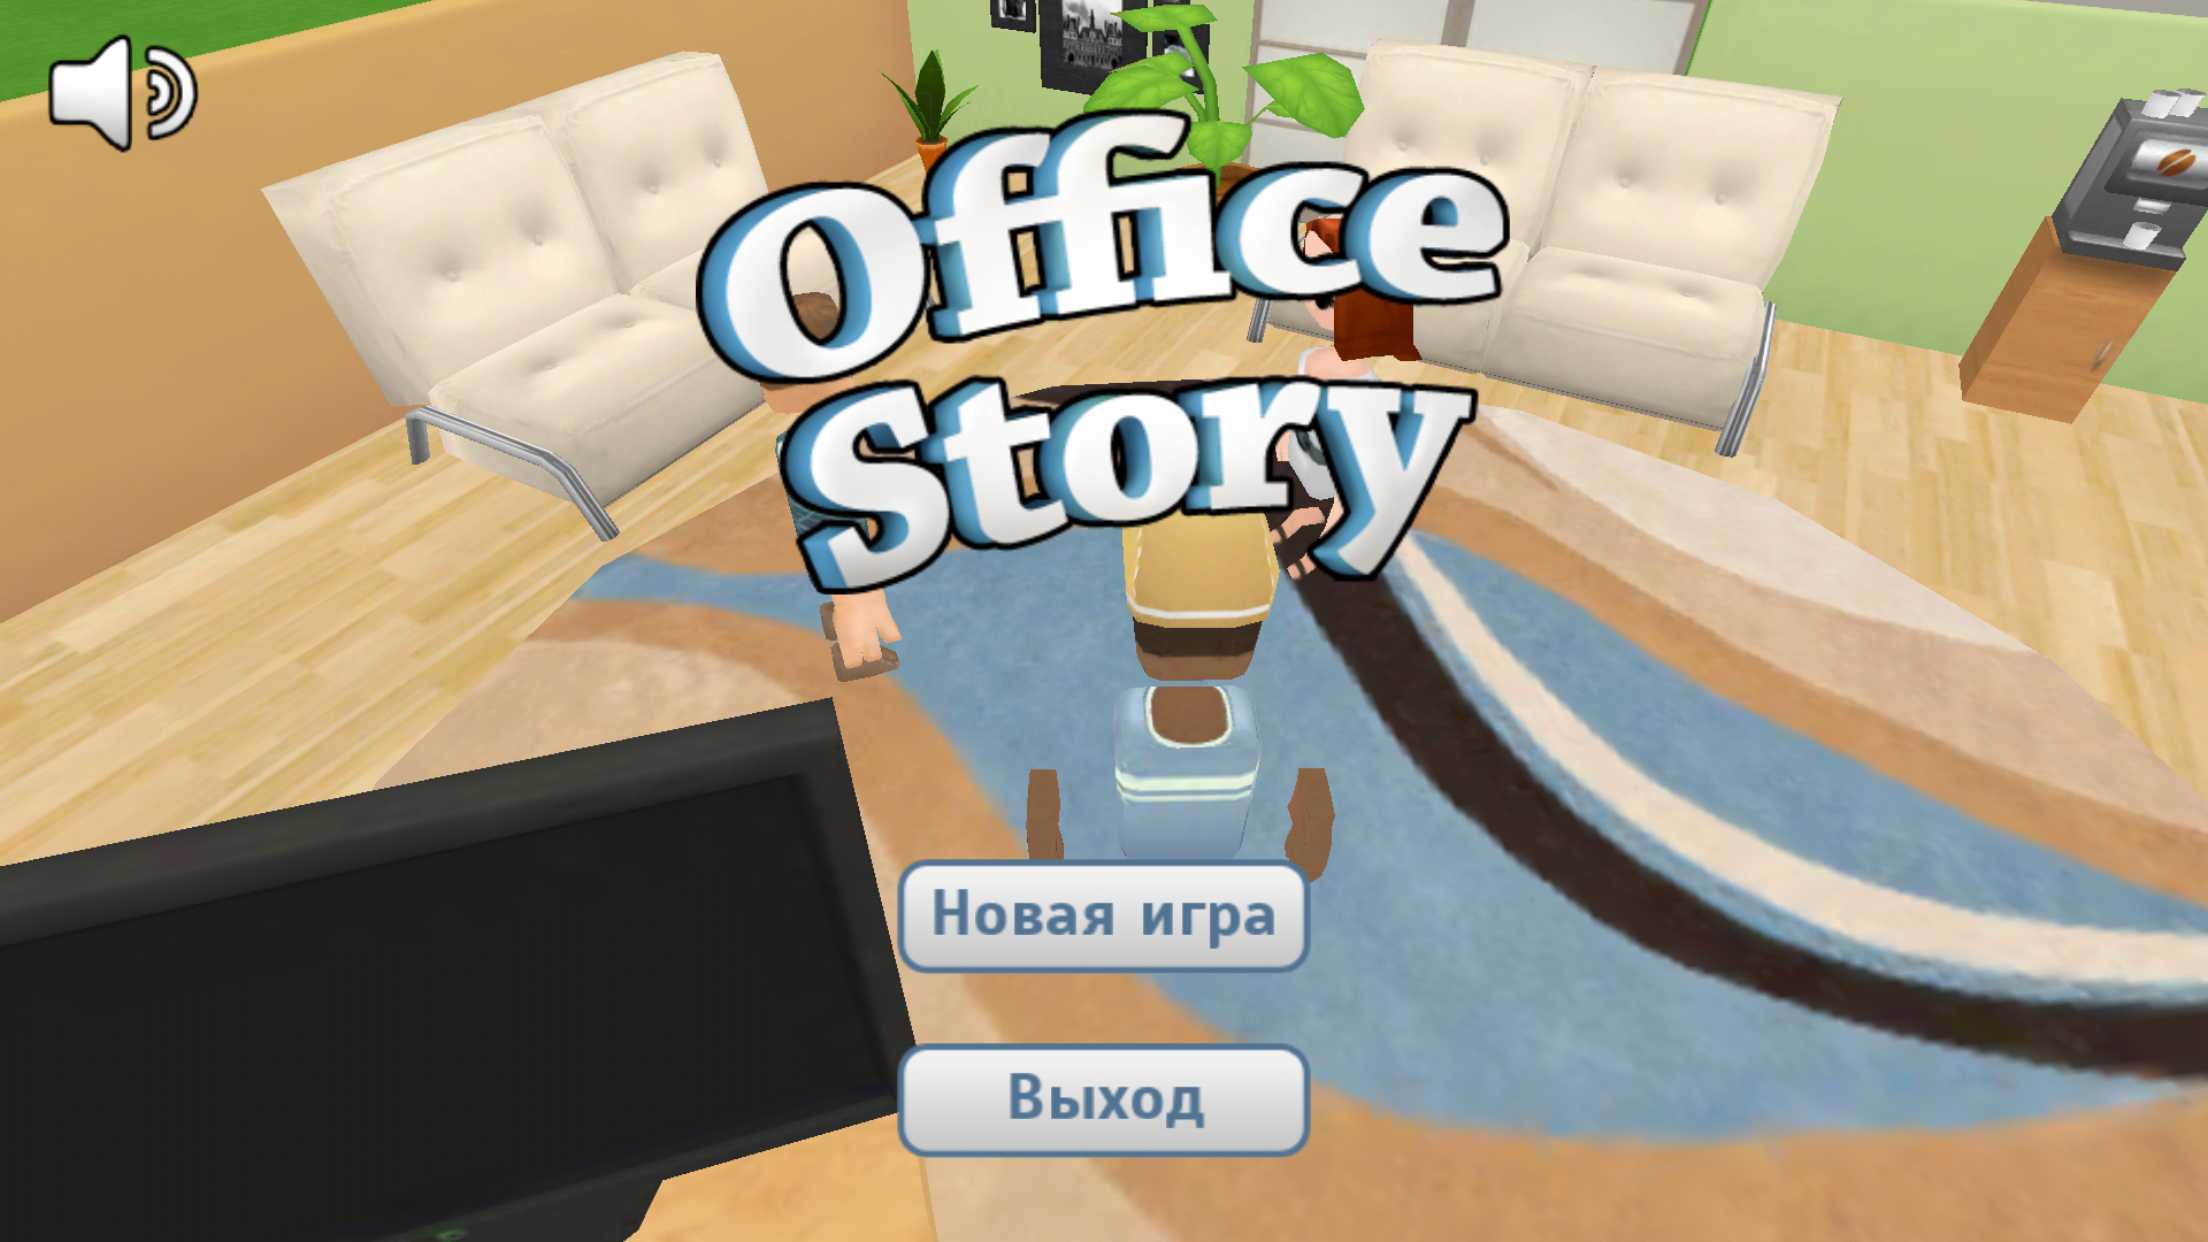 My new story. Игра Office story. Андроид Office story. Continue the story game. IOS Hack.